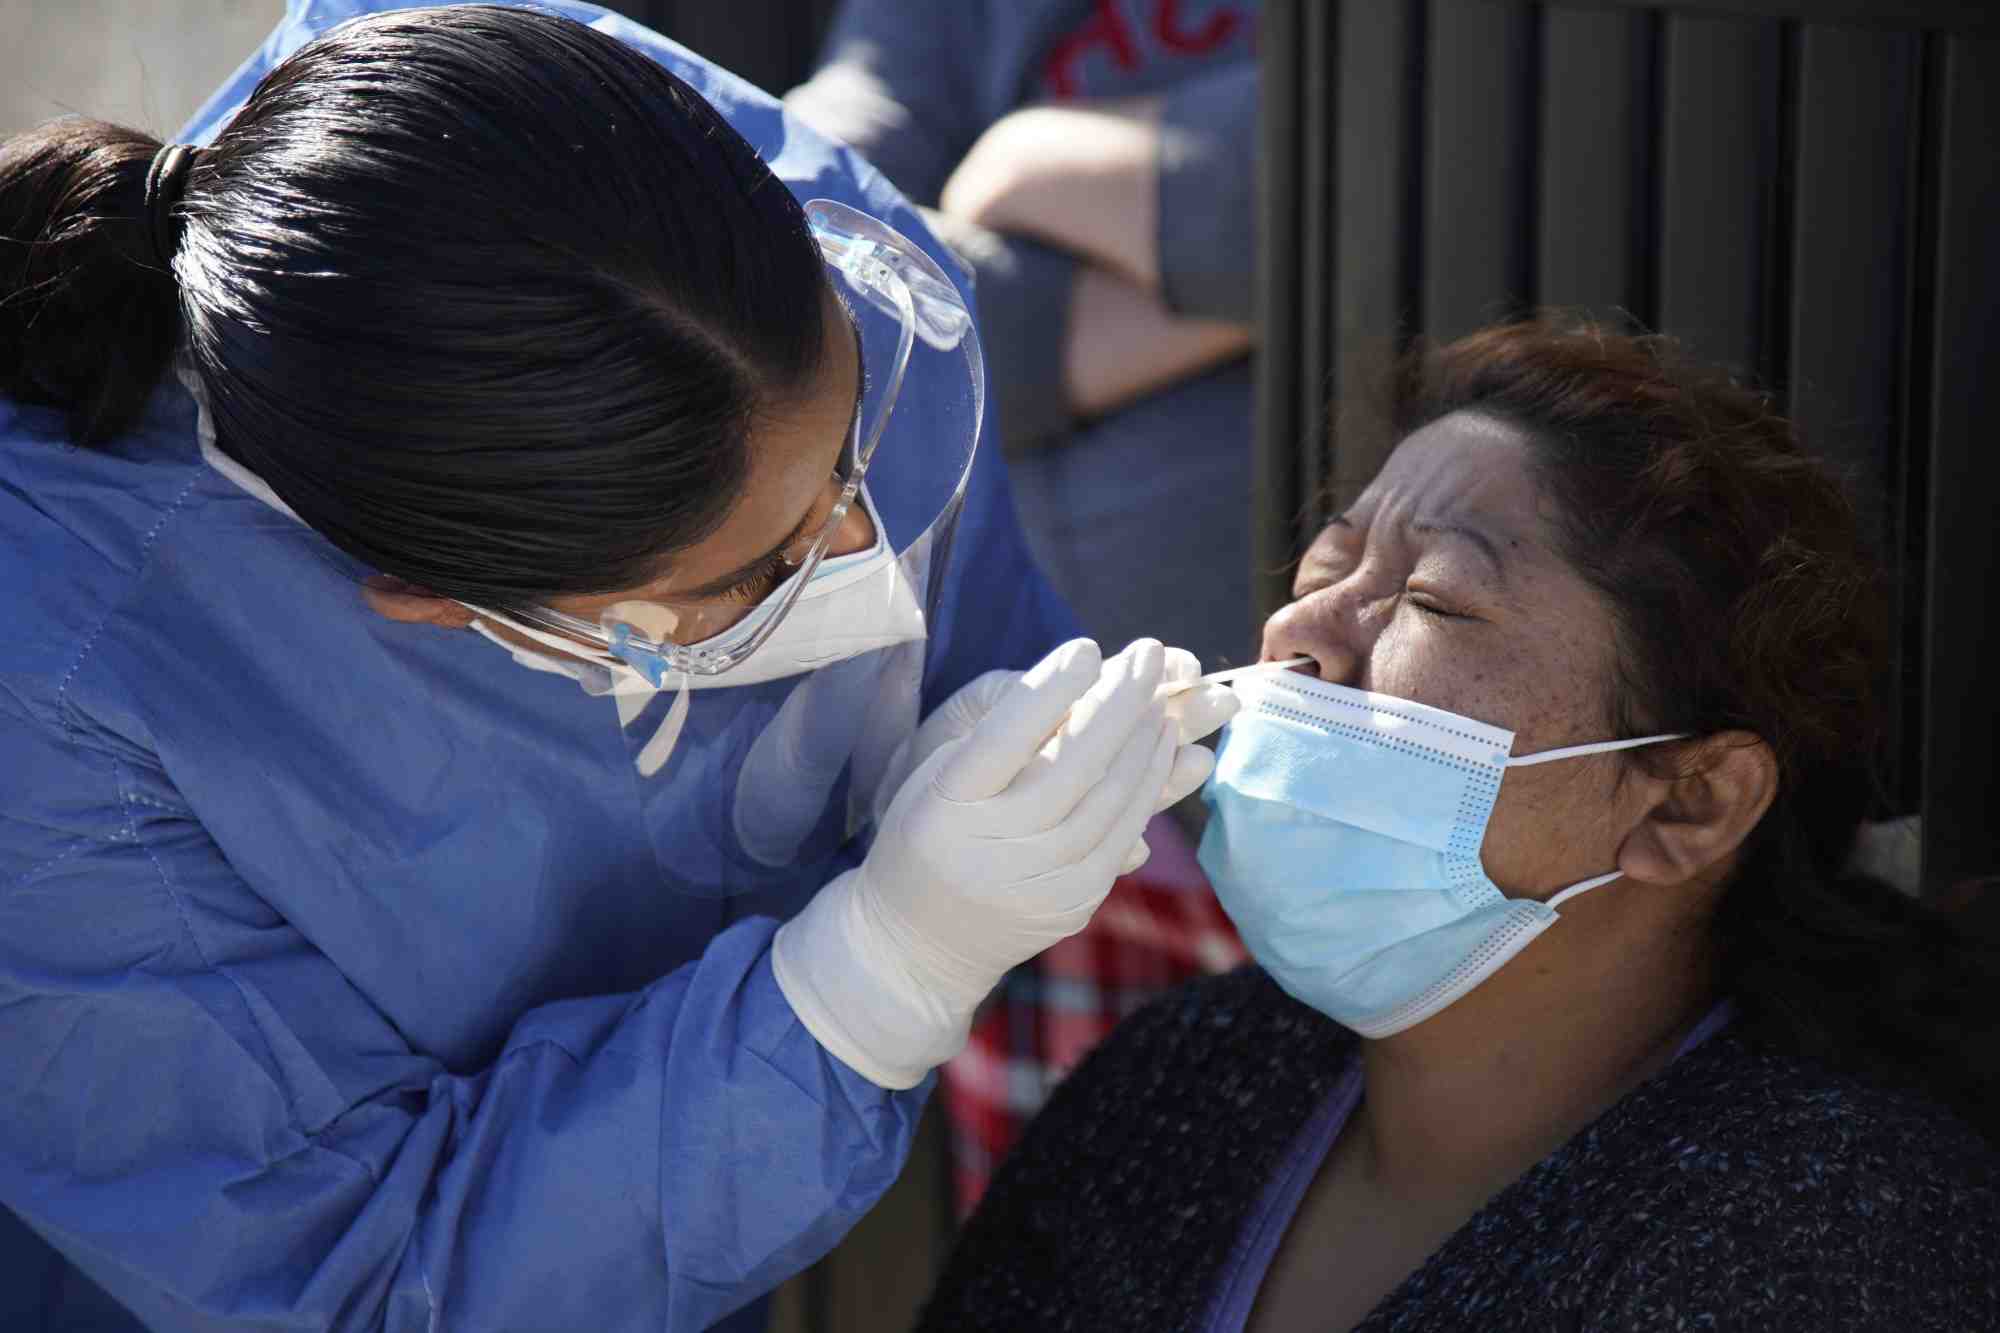 Should I wear a mask to the dentist during the COVID-19 pandemic?